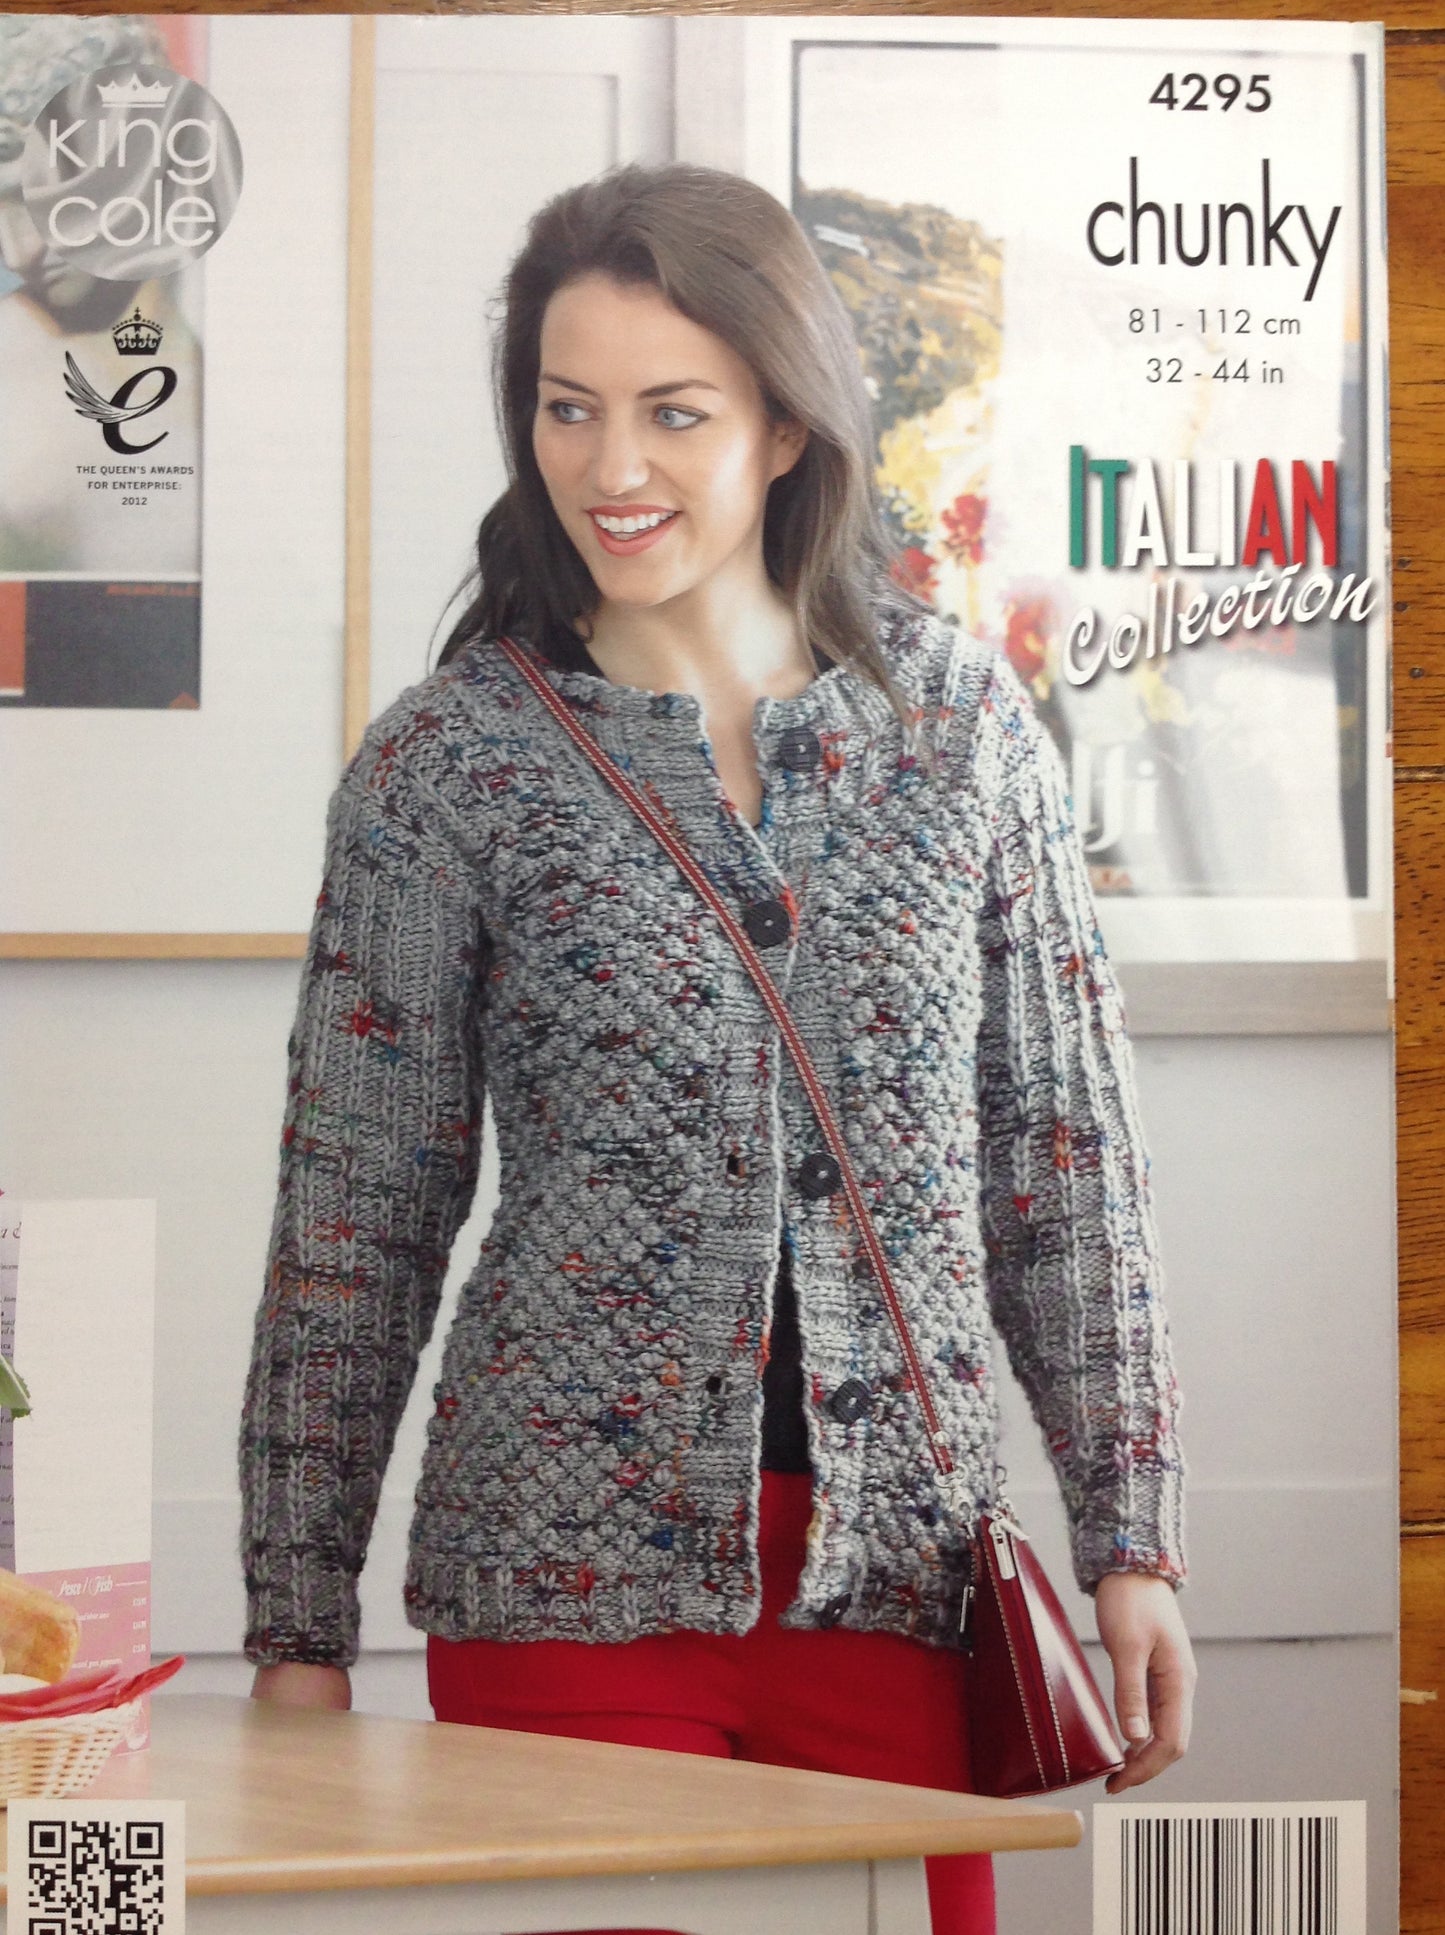 4295 King Cole Florence Chunky ladies sweater and cardigan knitting pattern